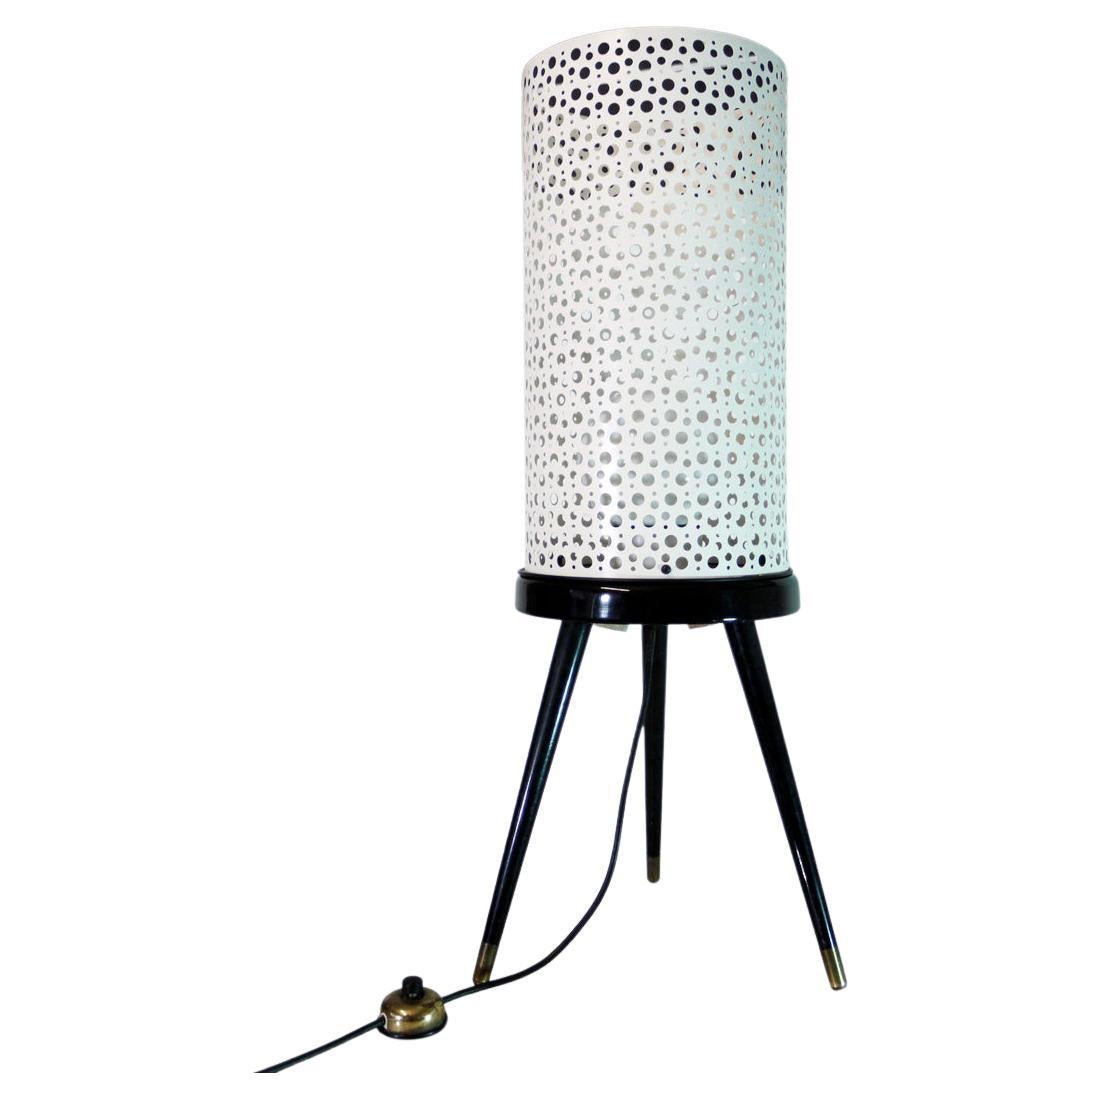 1950s Italy Perforated Metal Floor Lamp Black & White in the Manner of Stilnovo For Sale